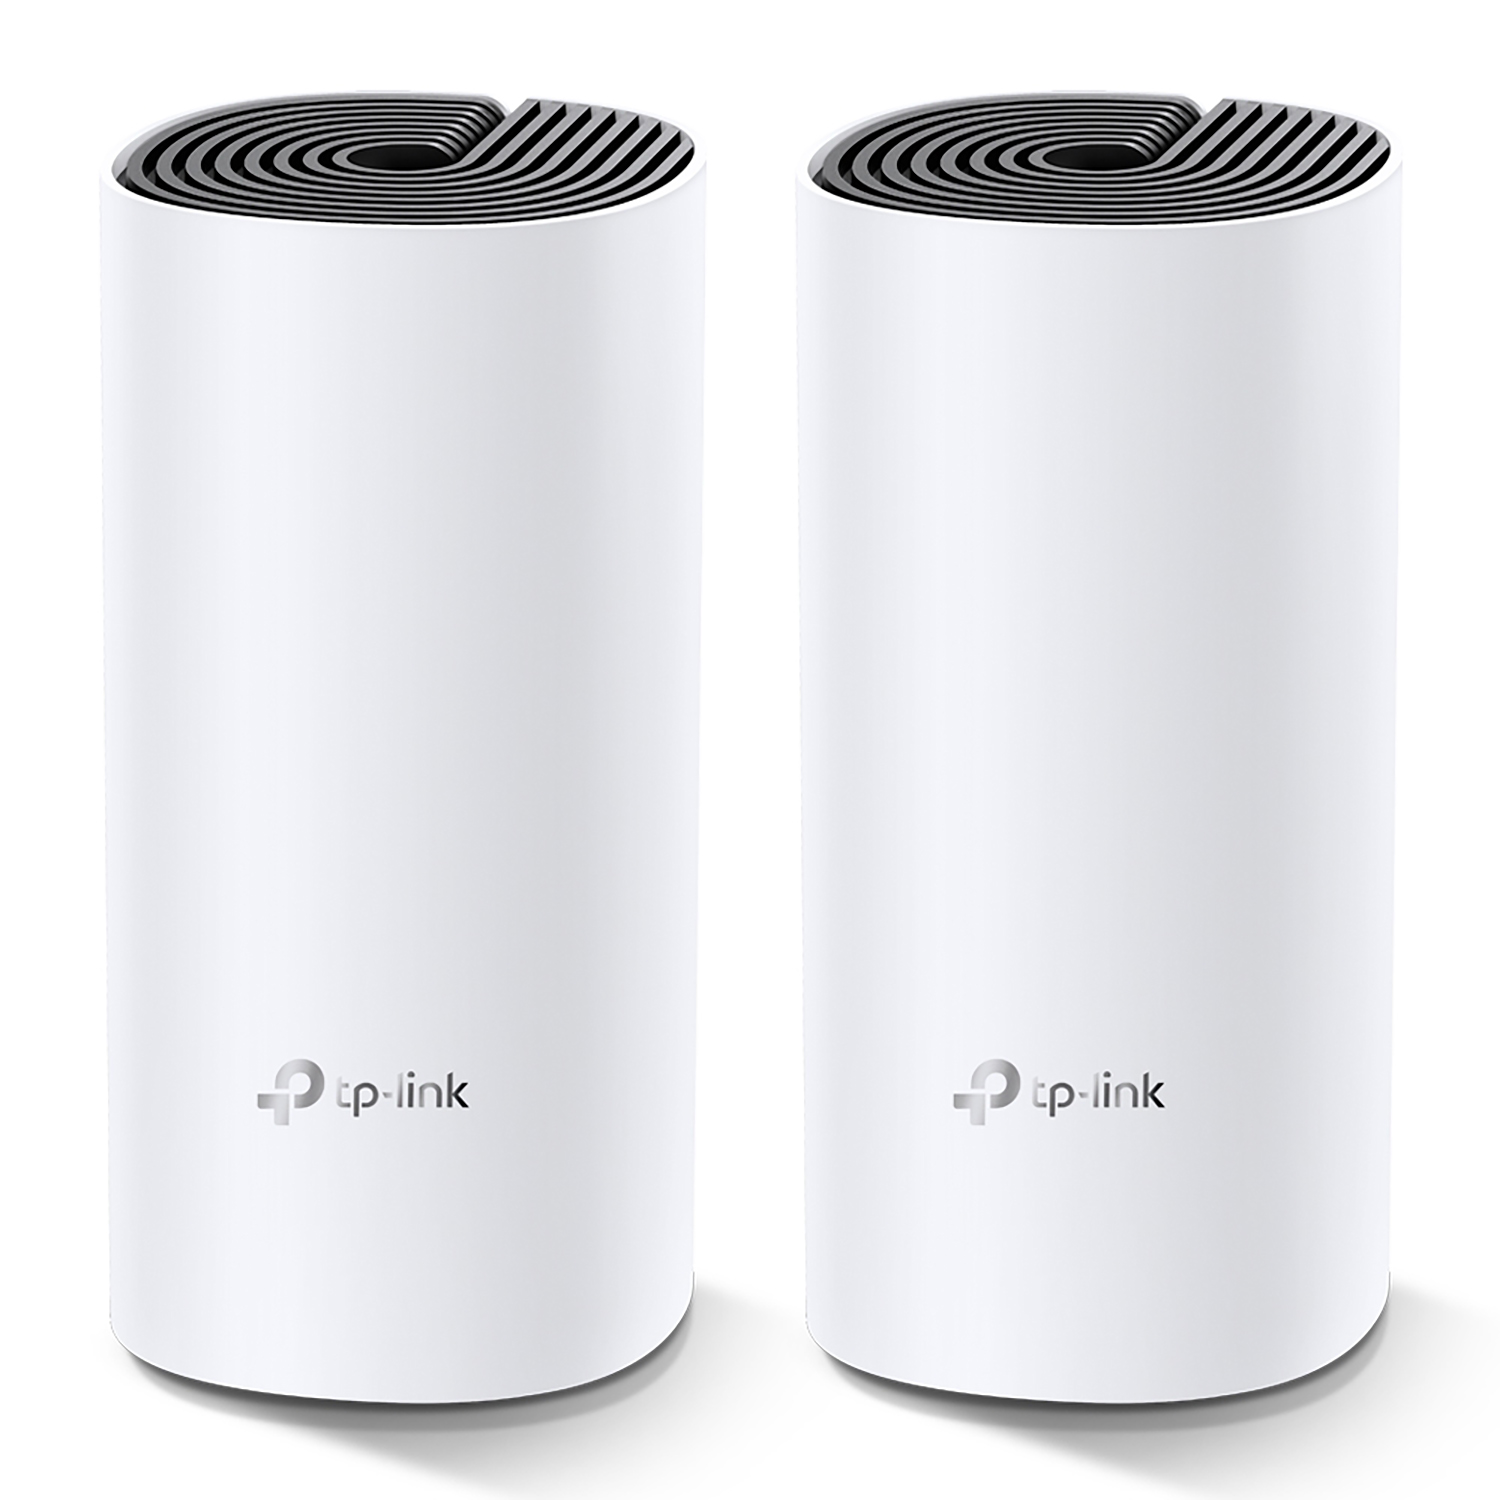 TP-Link Deco HC4 AC1200 Whole Home WiFi mesh Wi-Fi System ( 2 packs ) SUPPORT UNIFI, MAXIS, CELCOM , TIME & HyppTV